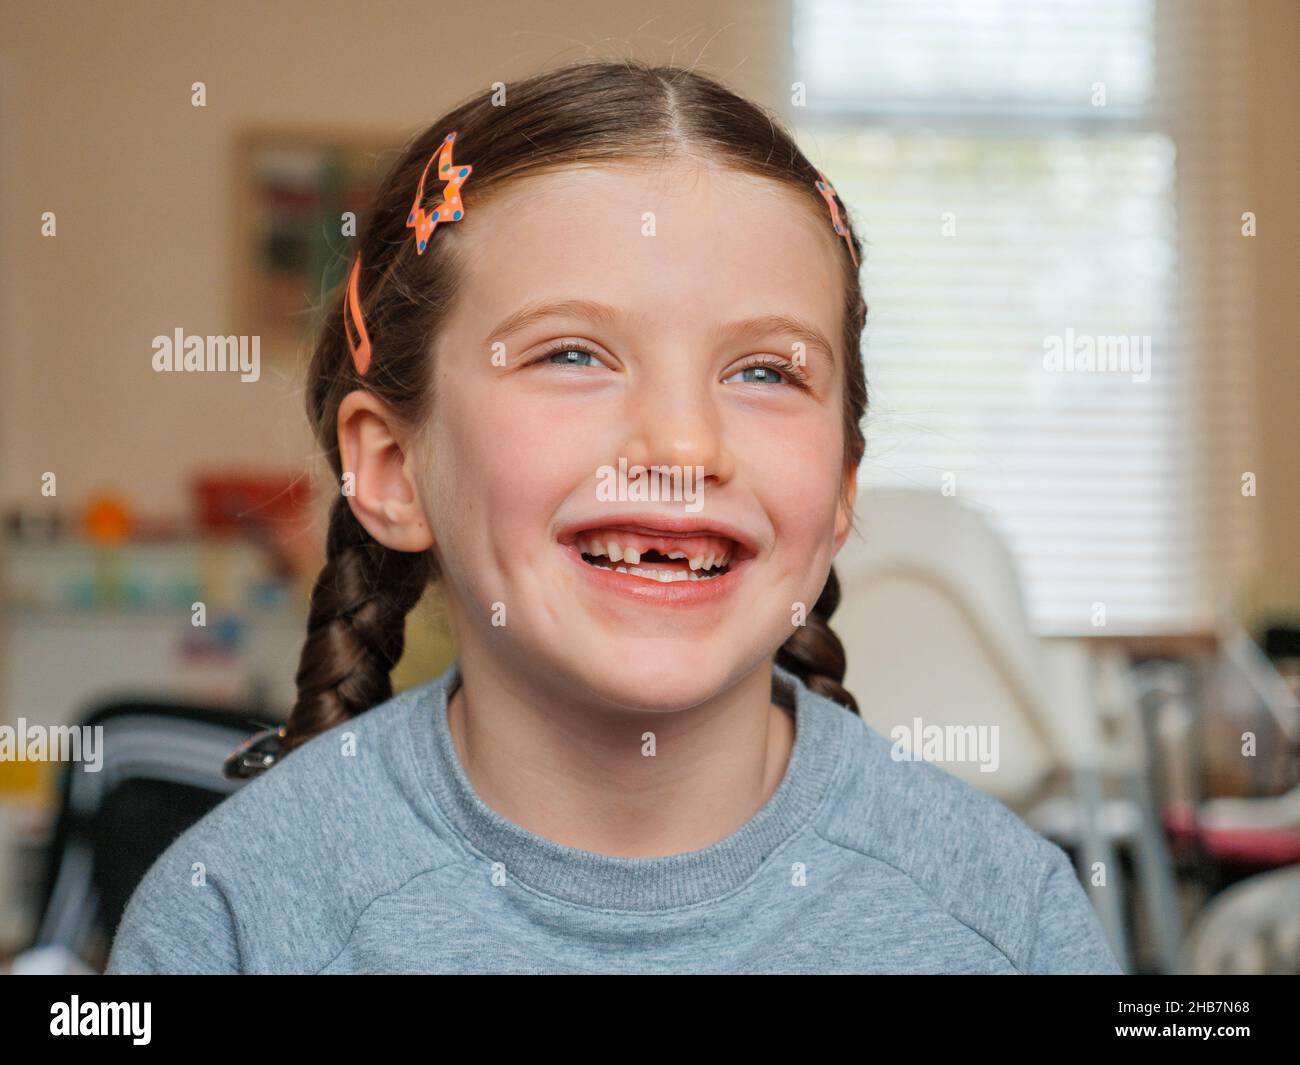 Portrait of happy smiling seven year old girl who has lost her front baby teeth which have fallen out Stock Photo